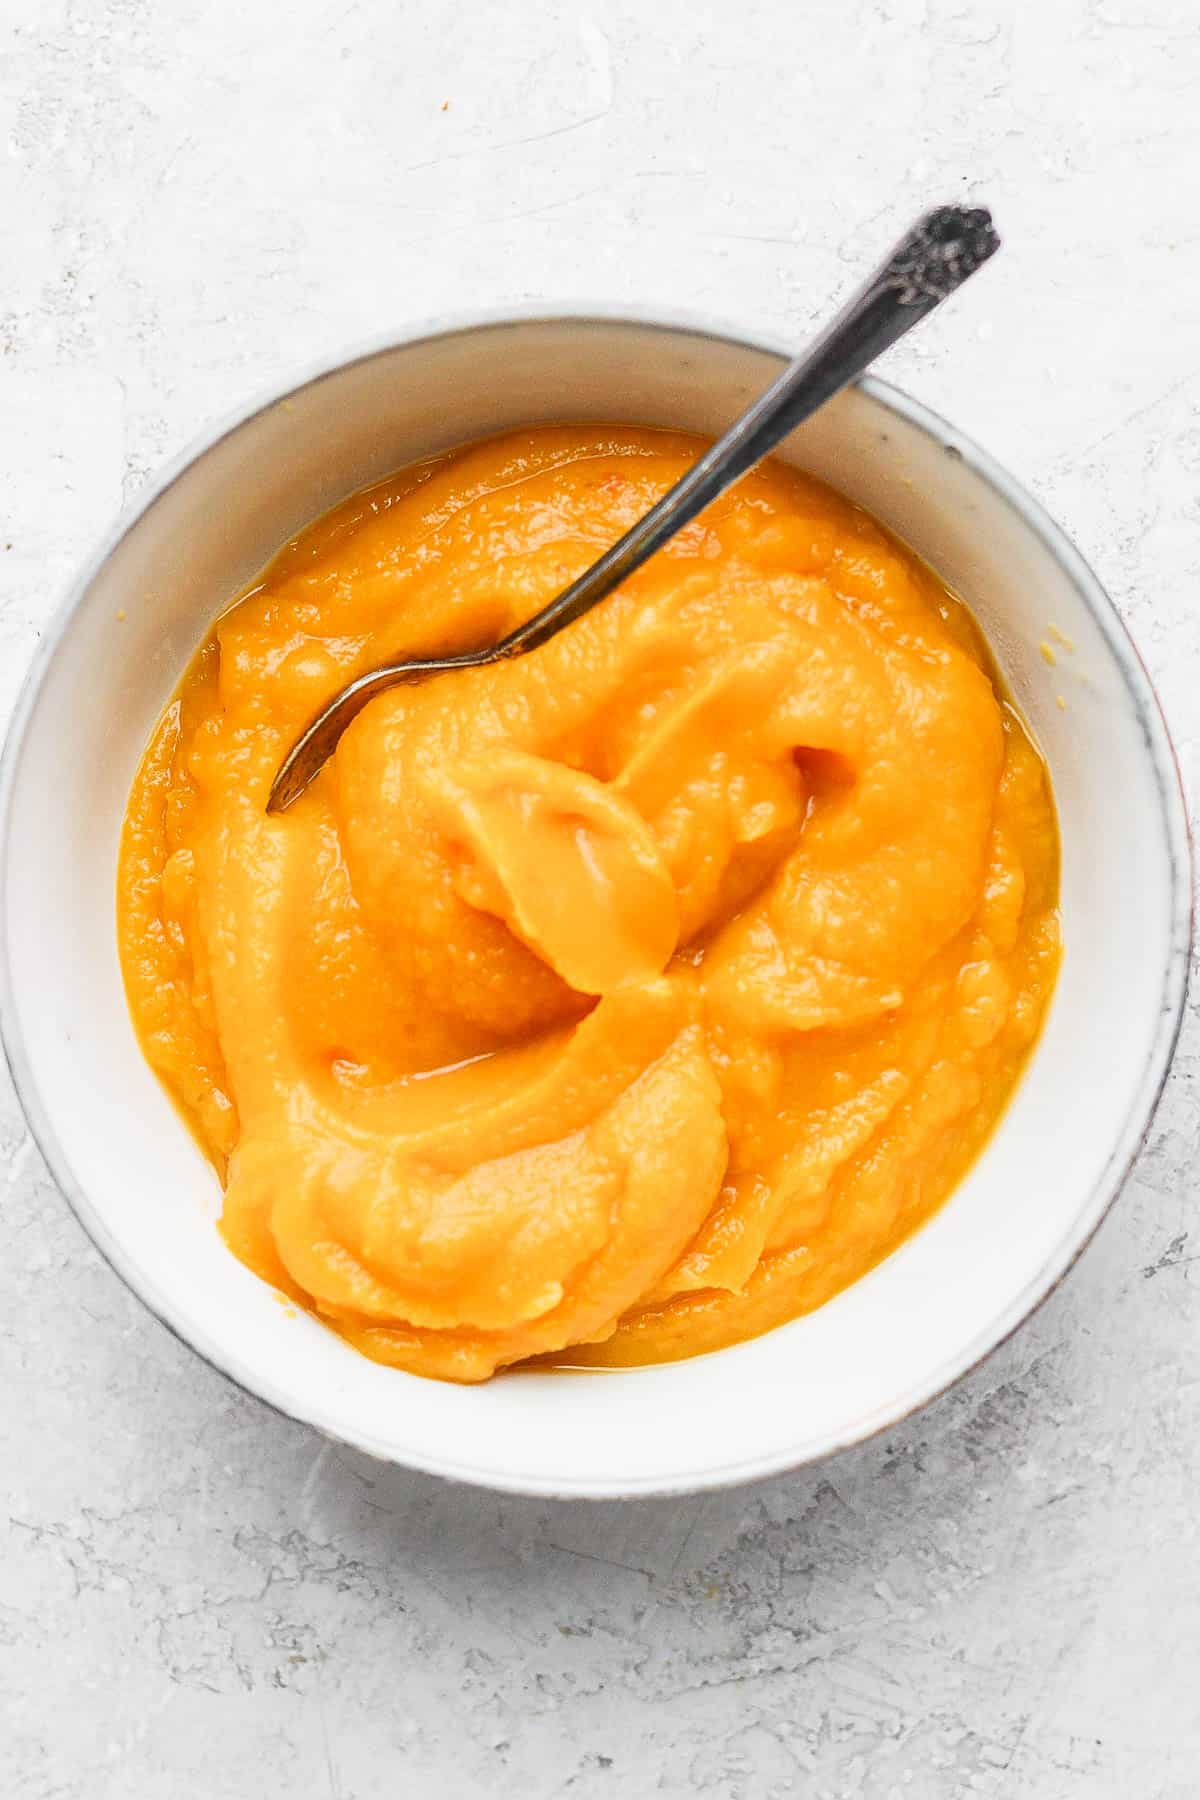 Homemade pumpkin puree from scratch in a bowl with a spoon